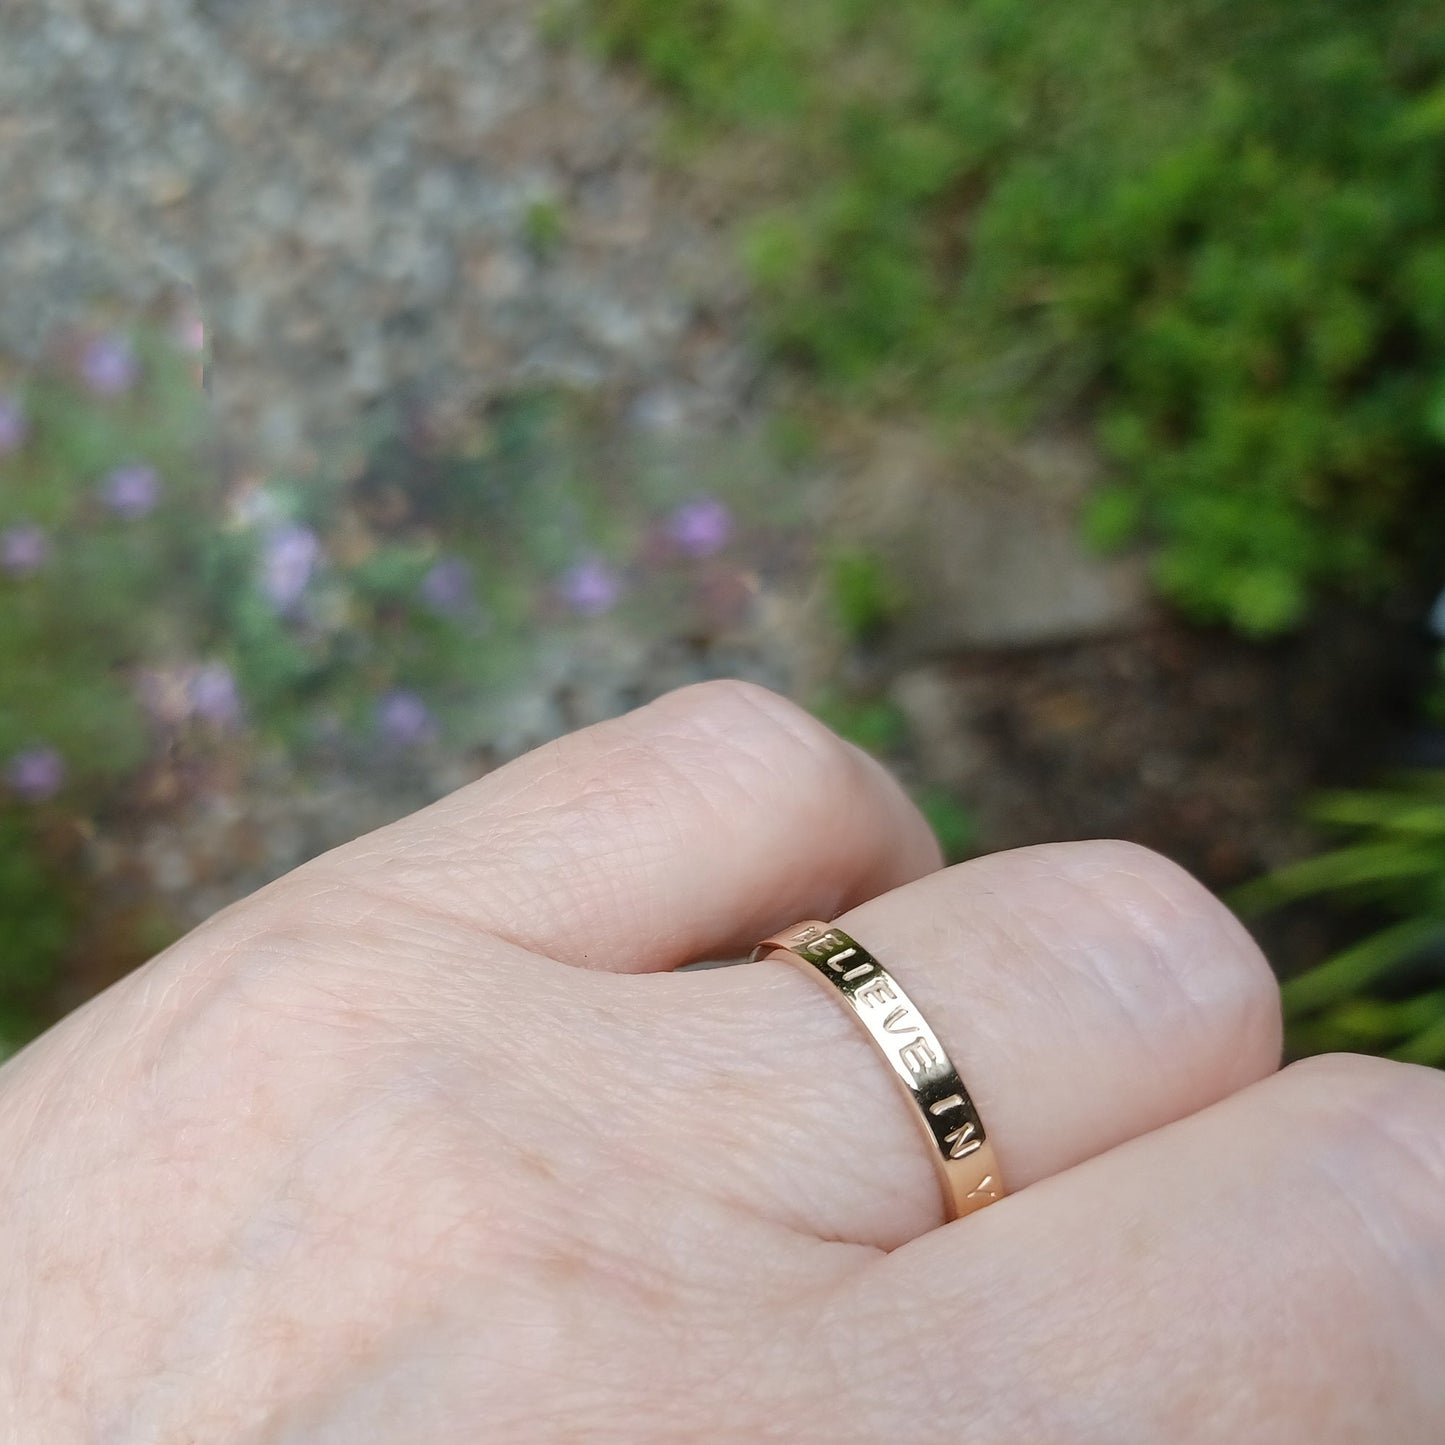 Gold ring shown on hand